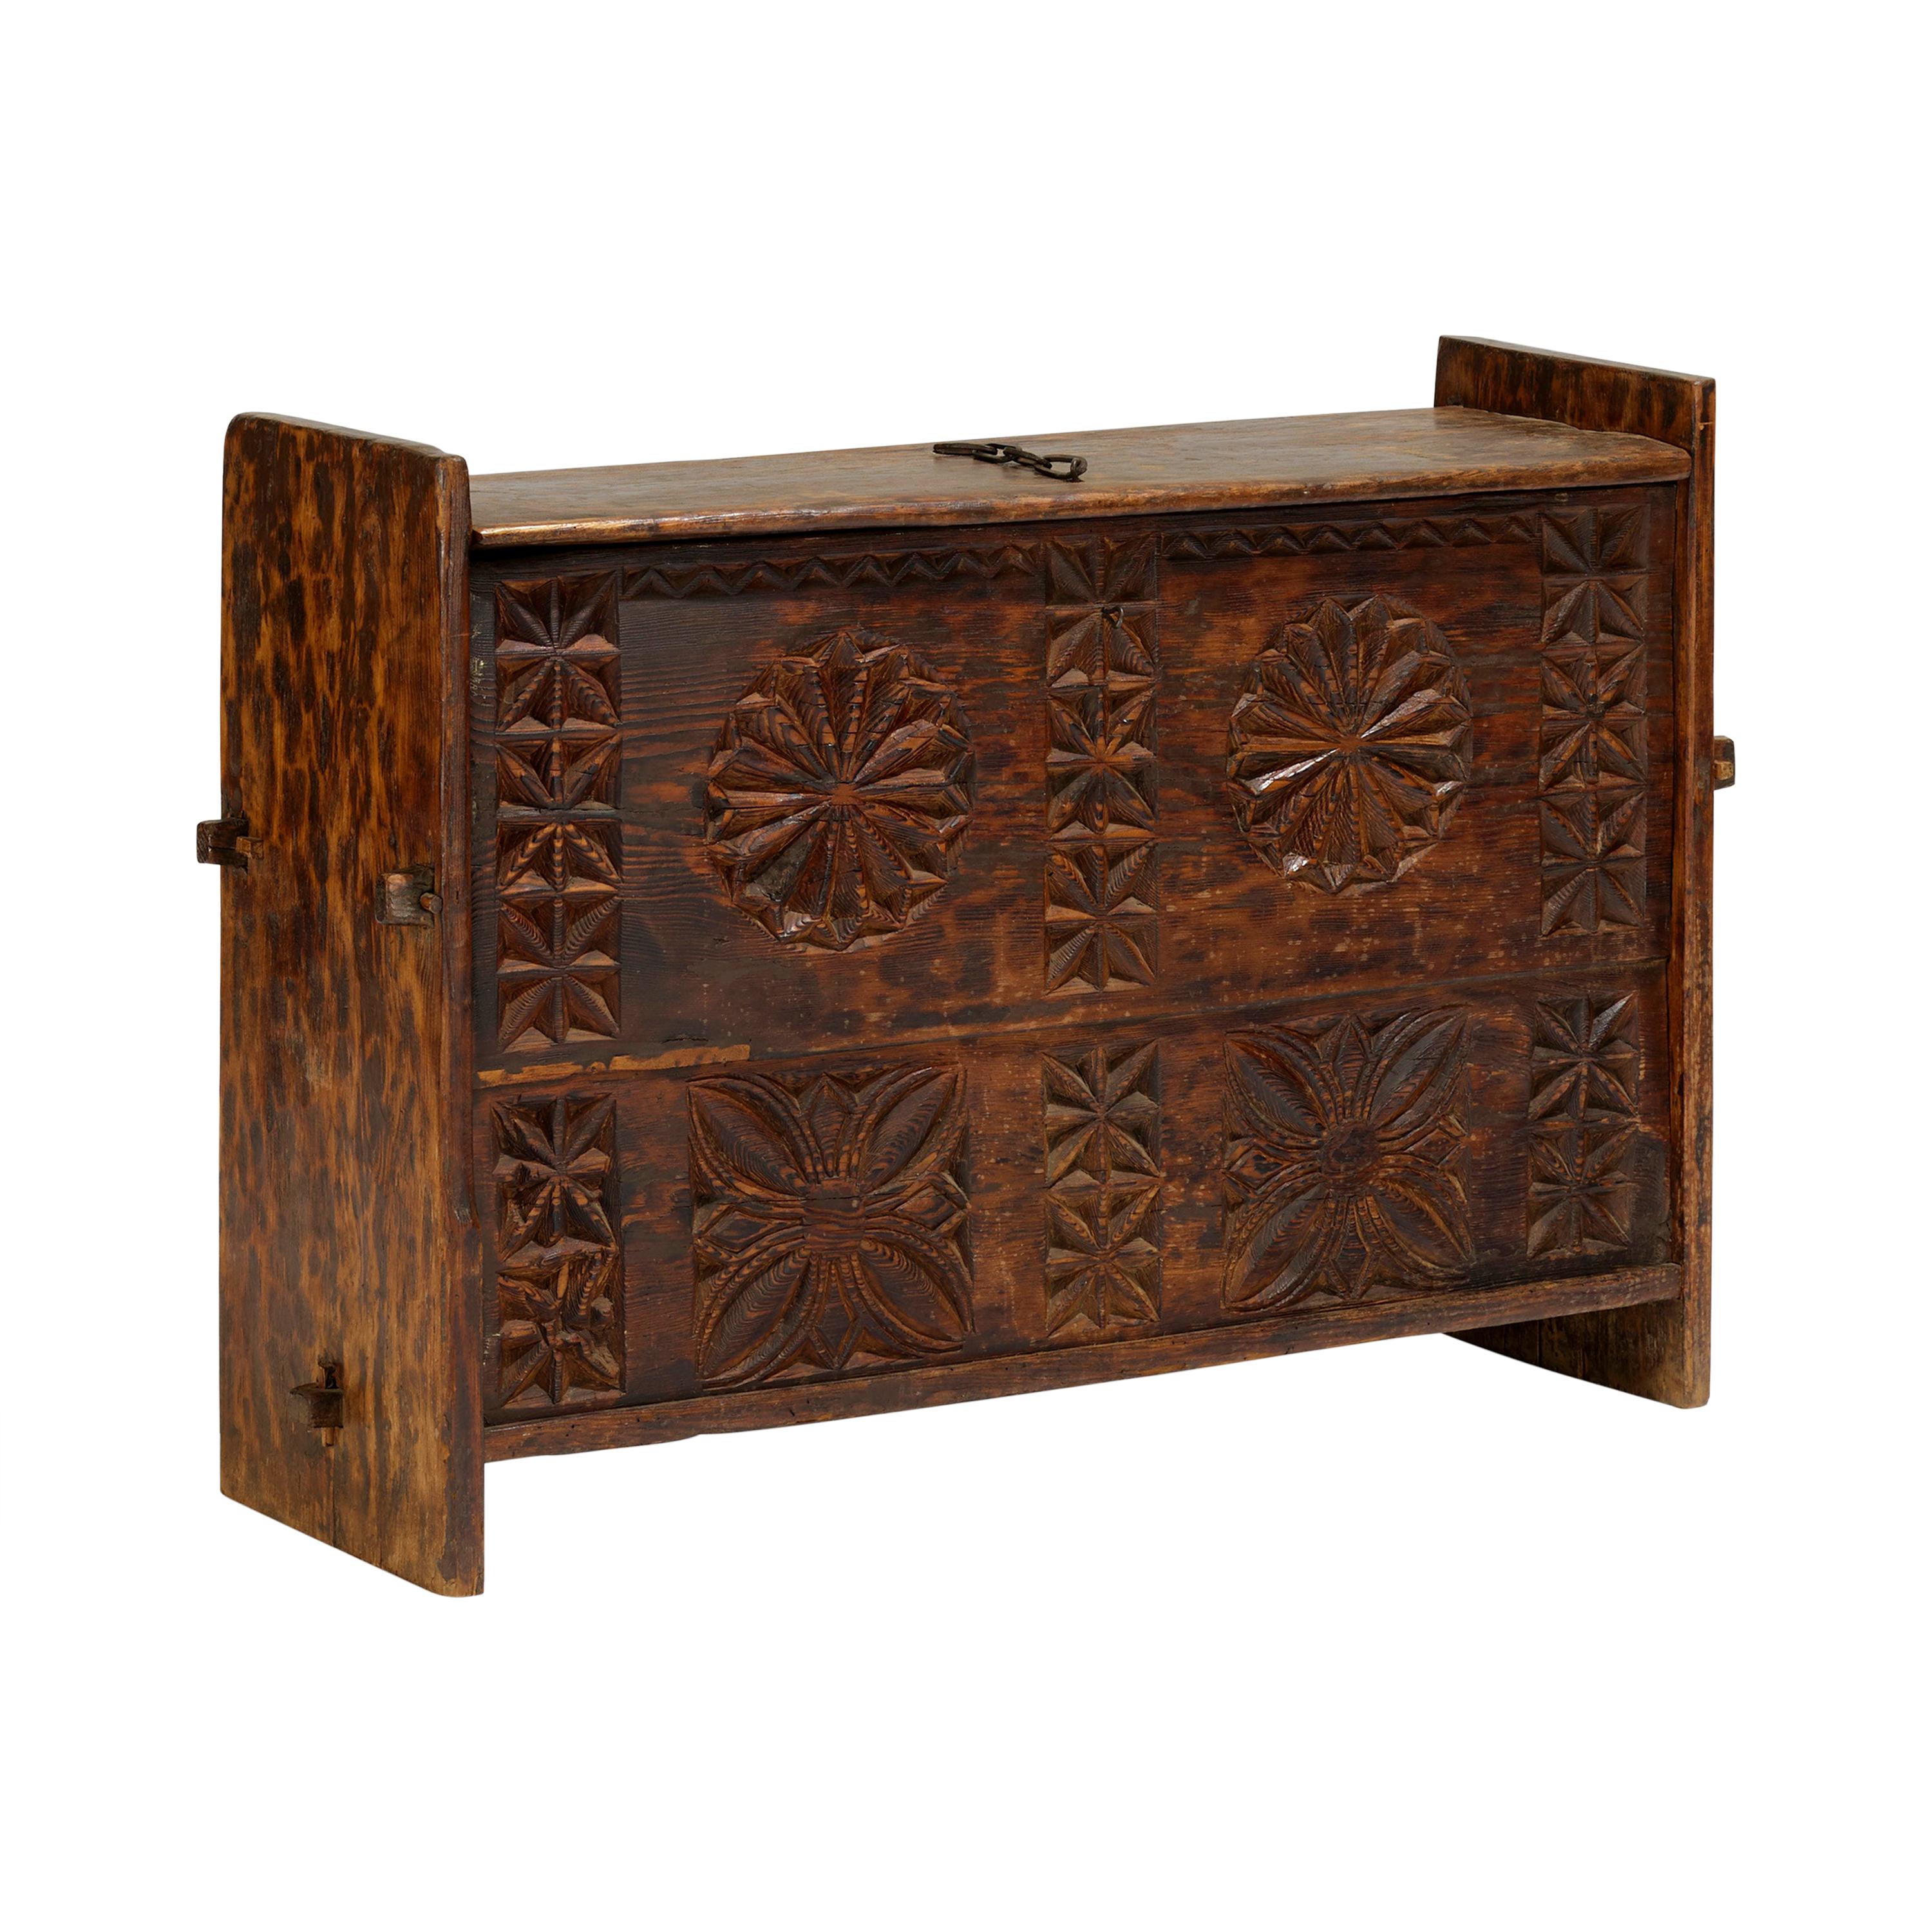 Antique 'Star Anise' Hand Carved Dowry Textile Chest, Nuristan, Afghanistan